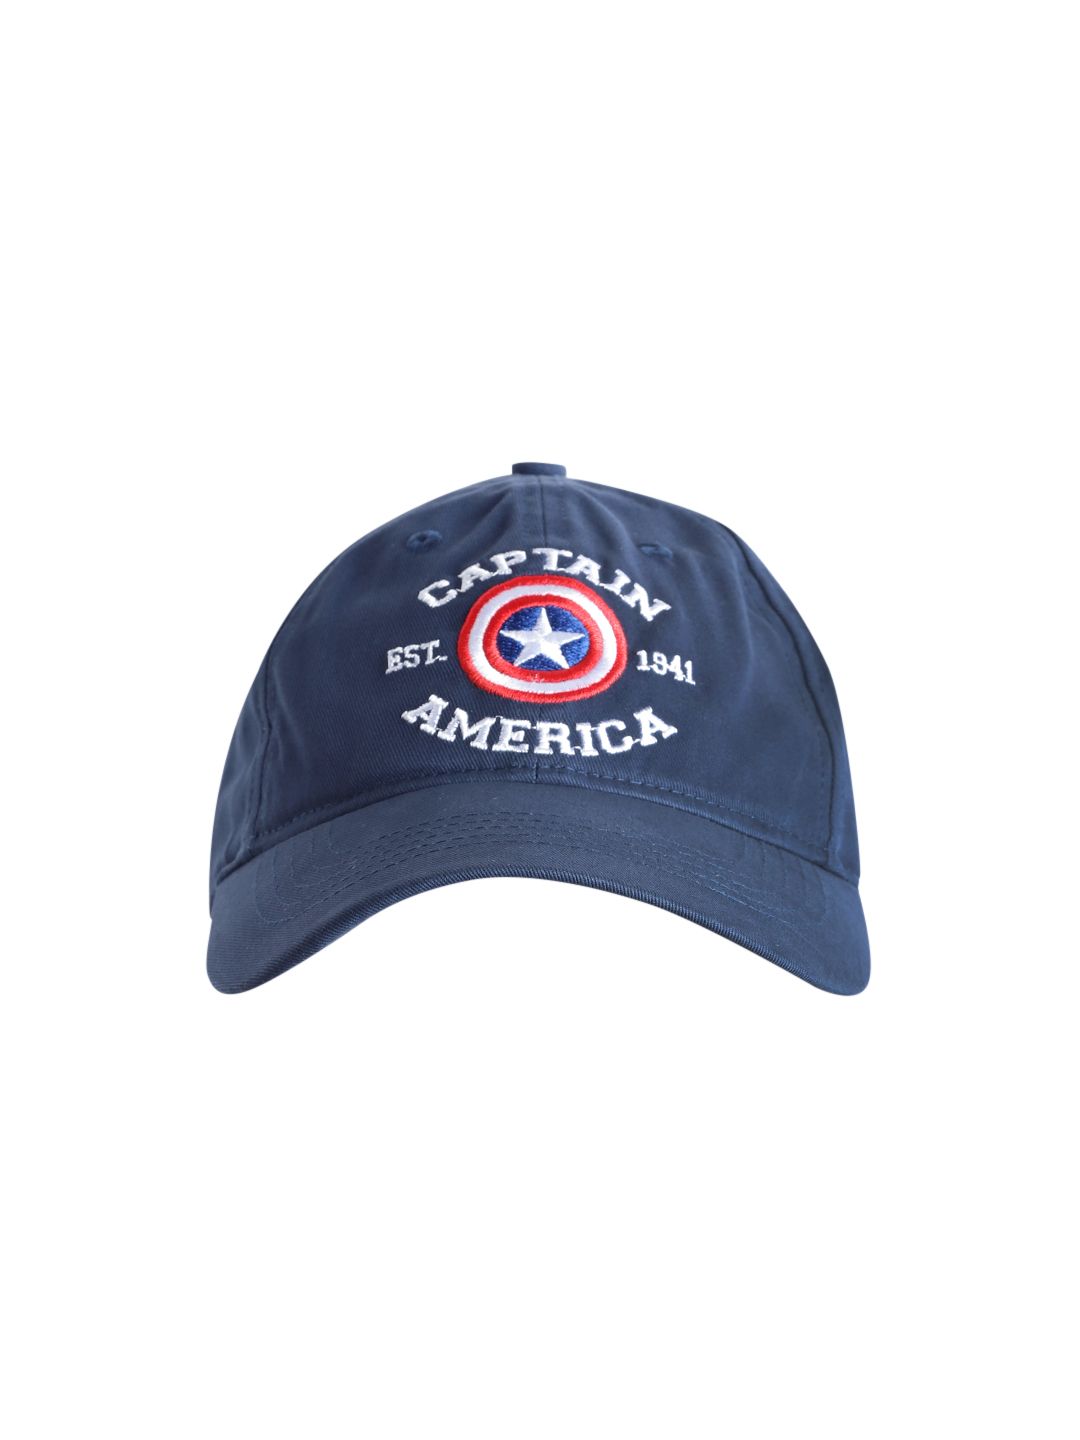 Kook N Keech Marvel Unisex Navy Blue & Red Captain America Embroidered Cotton Baseball Cap Price in India